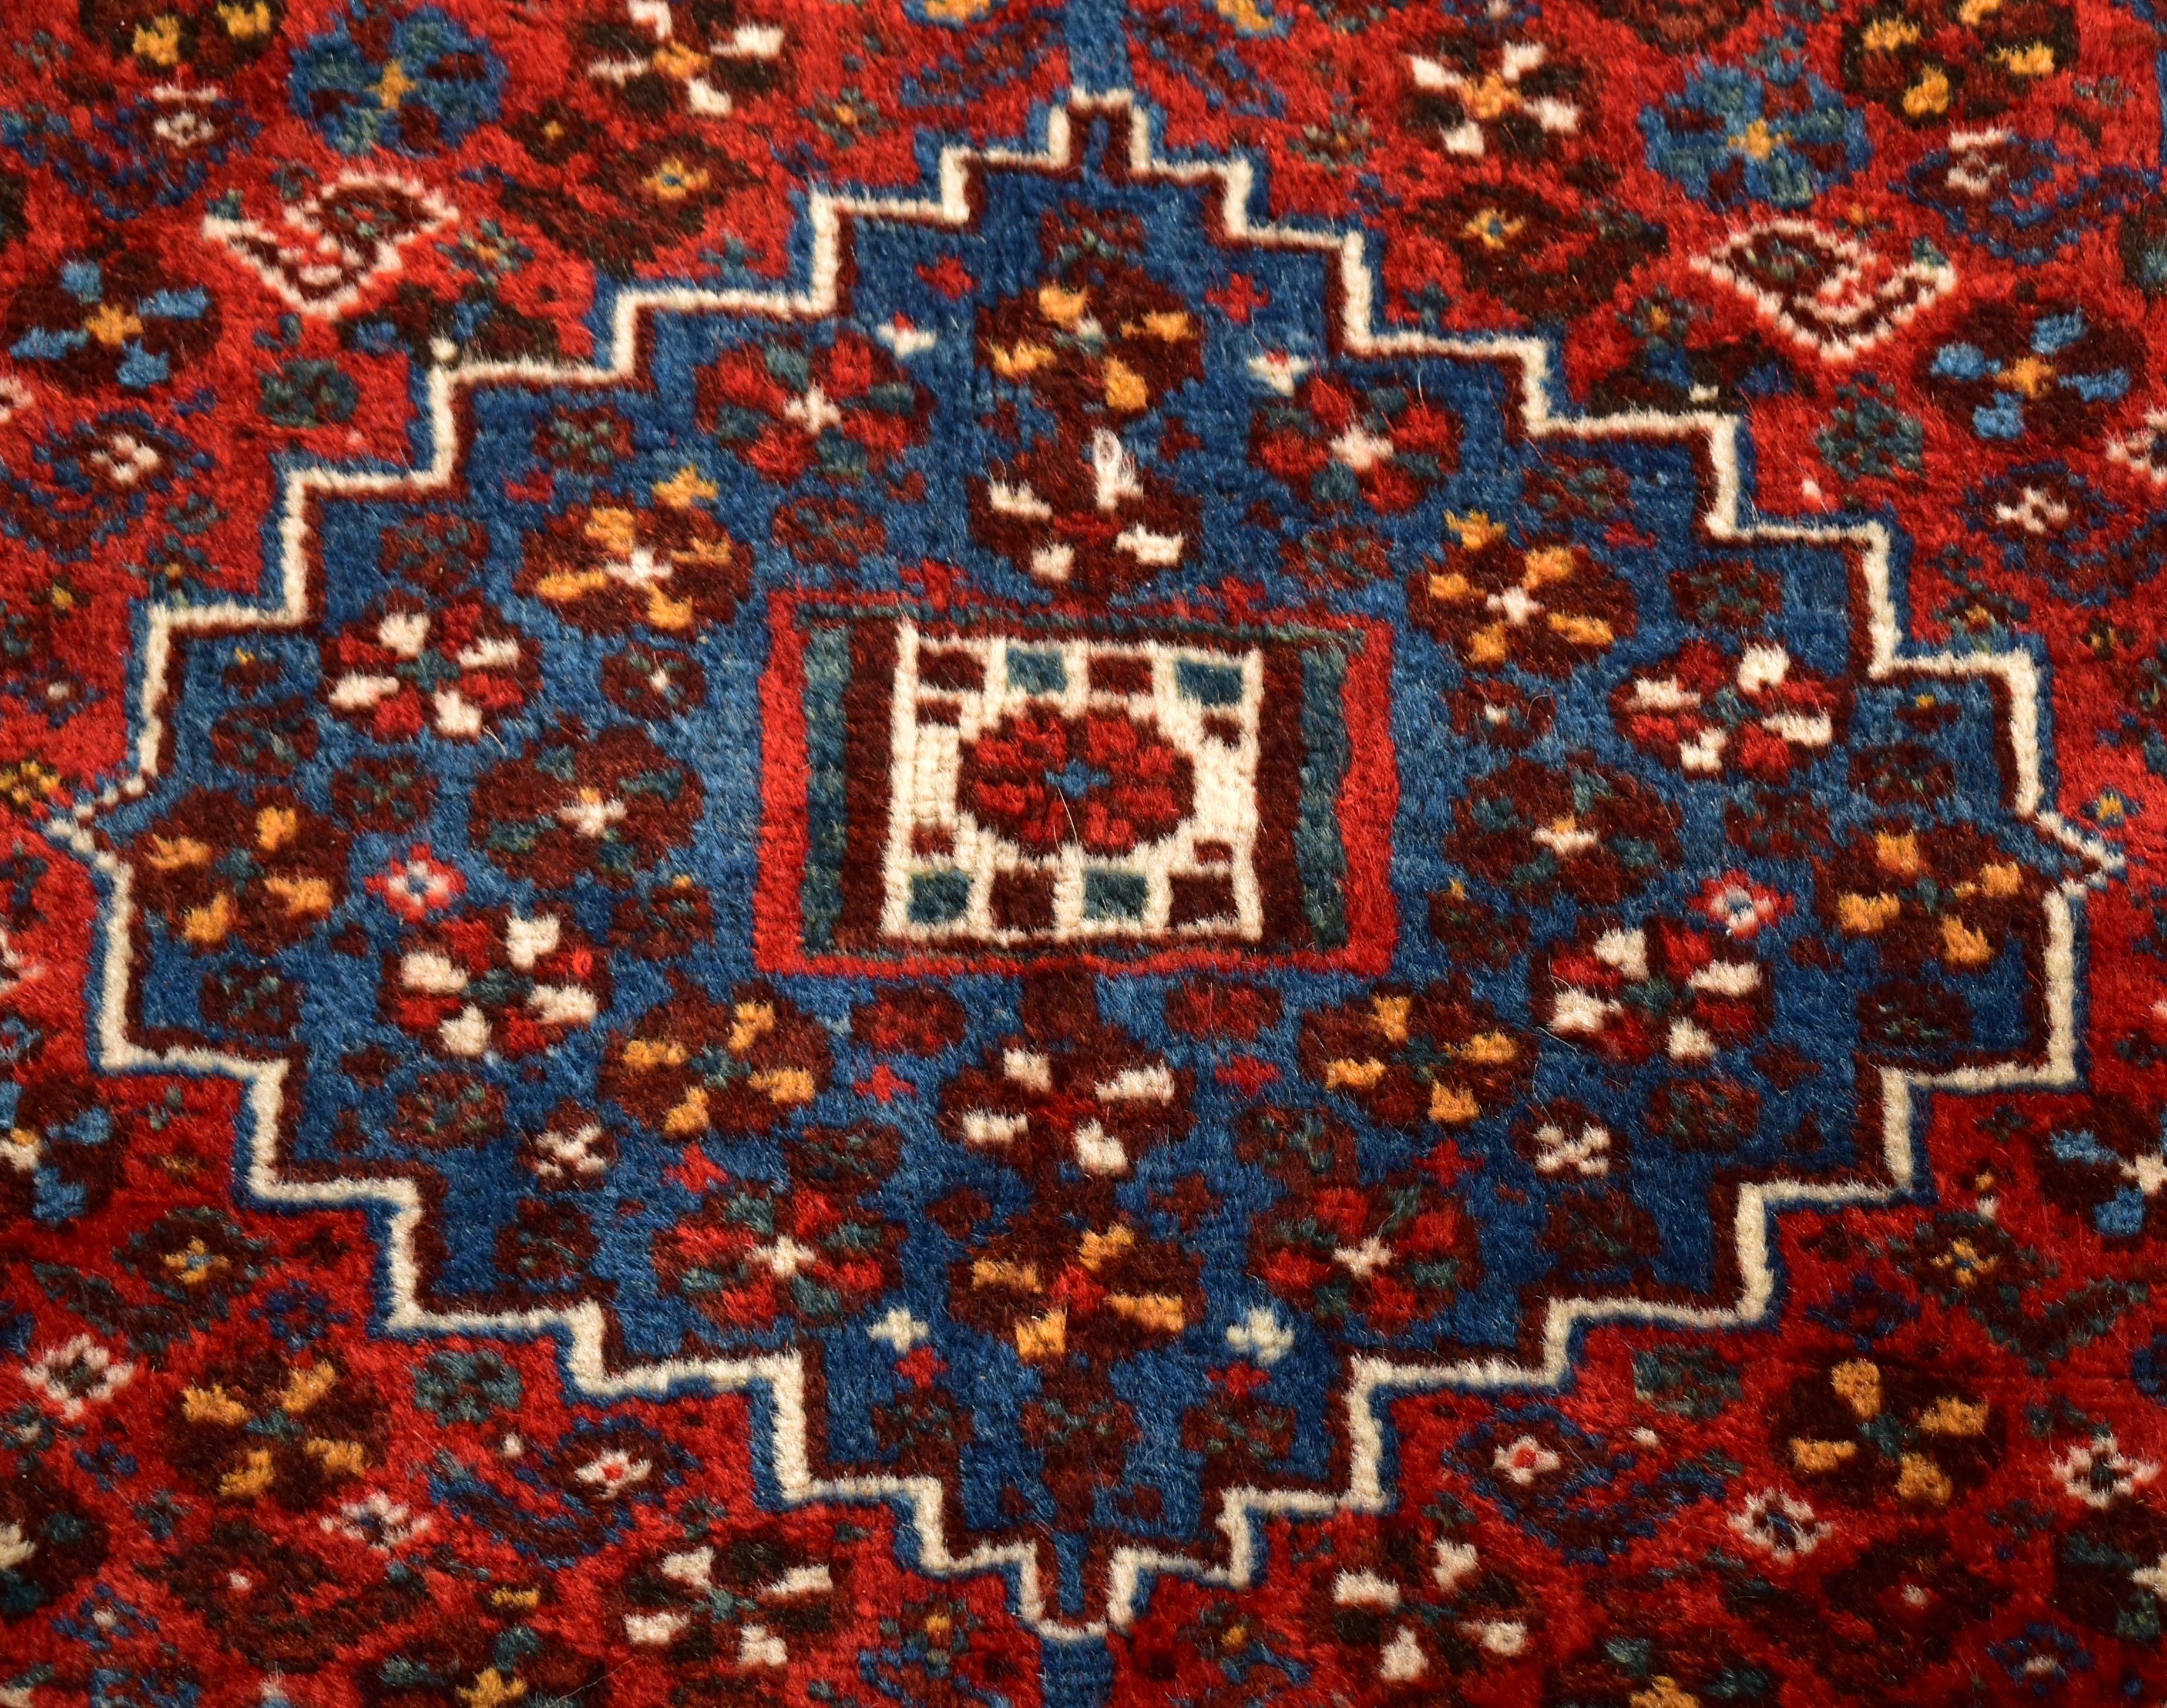 LARGE 20TH CENTURY AZERI PERSIAN HAND KNOTTED RUG - Image 3 of 5